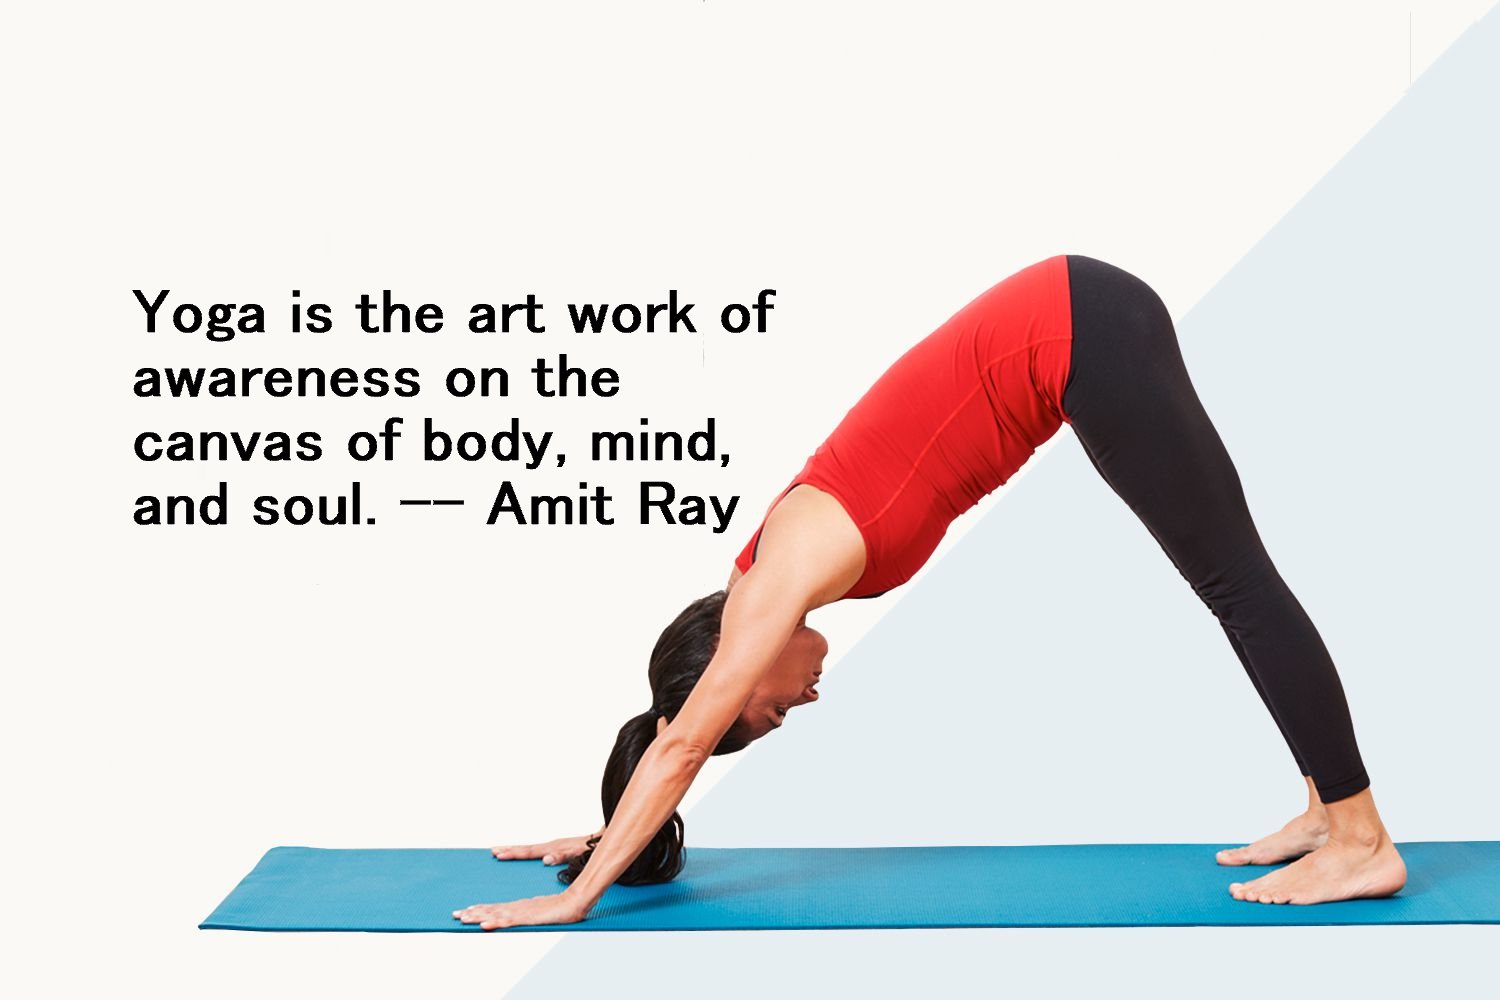 Yoga is the art work of awareness on the canvas of body, mind, and soul. - Amit Ray Yoga Quotes